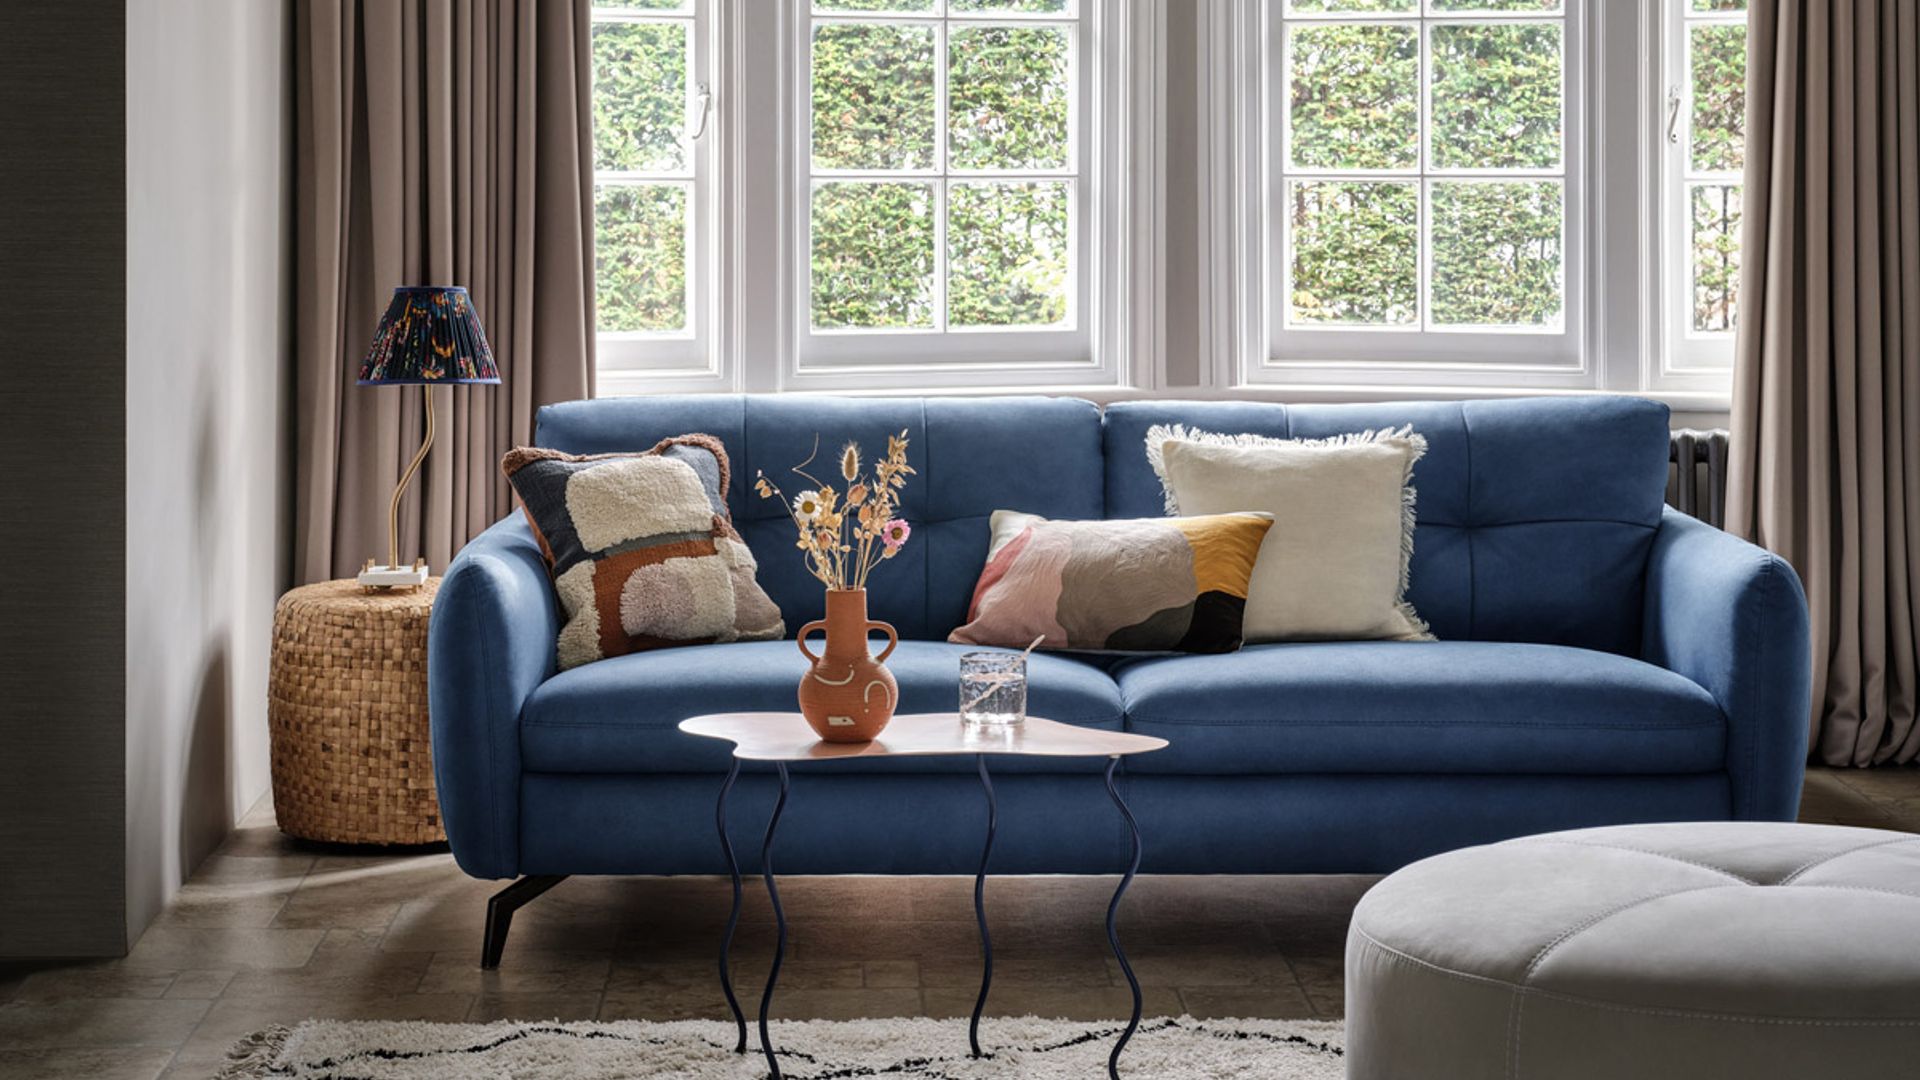 The Ultimate Best Sofas Guide For 2023 The Big Trends And The Top Sofa